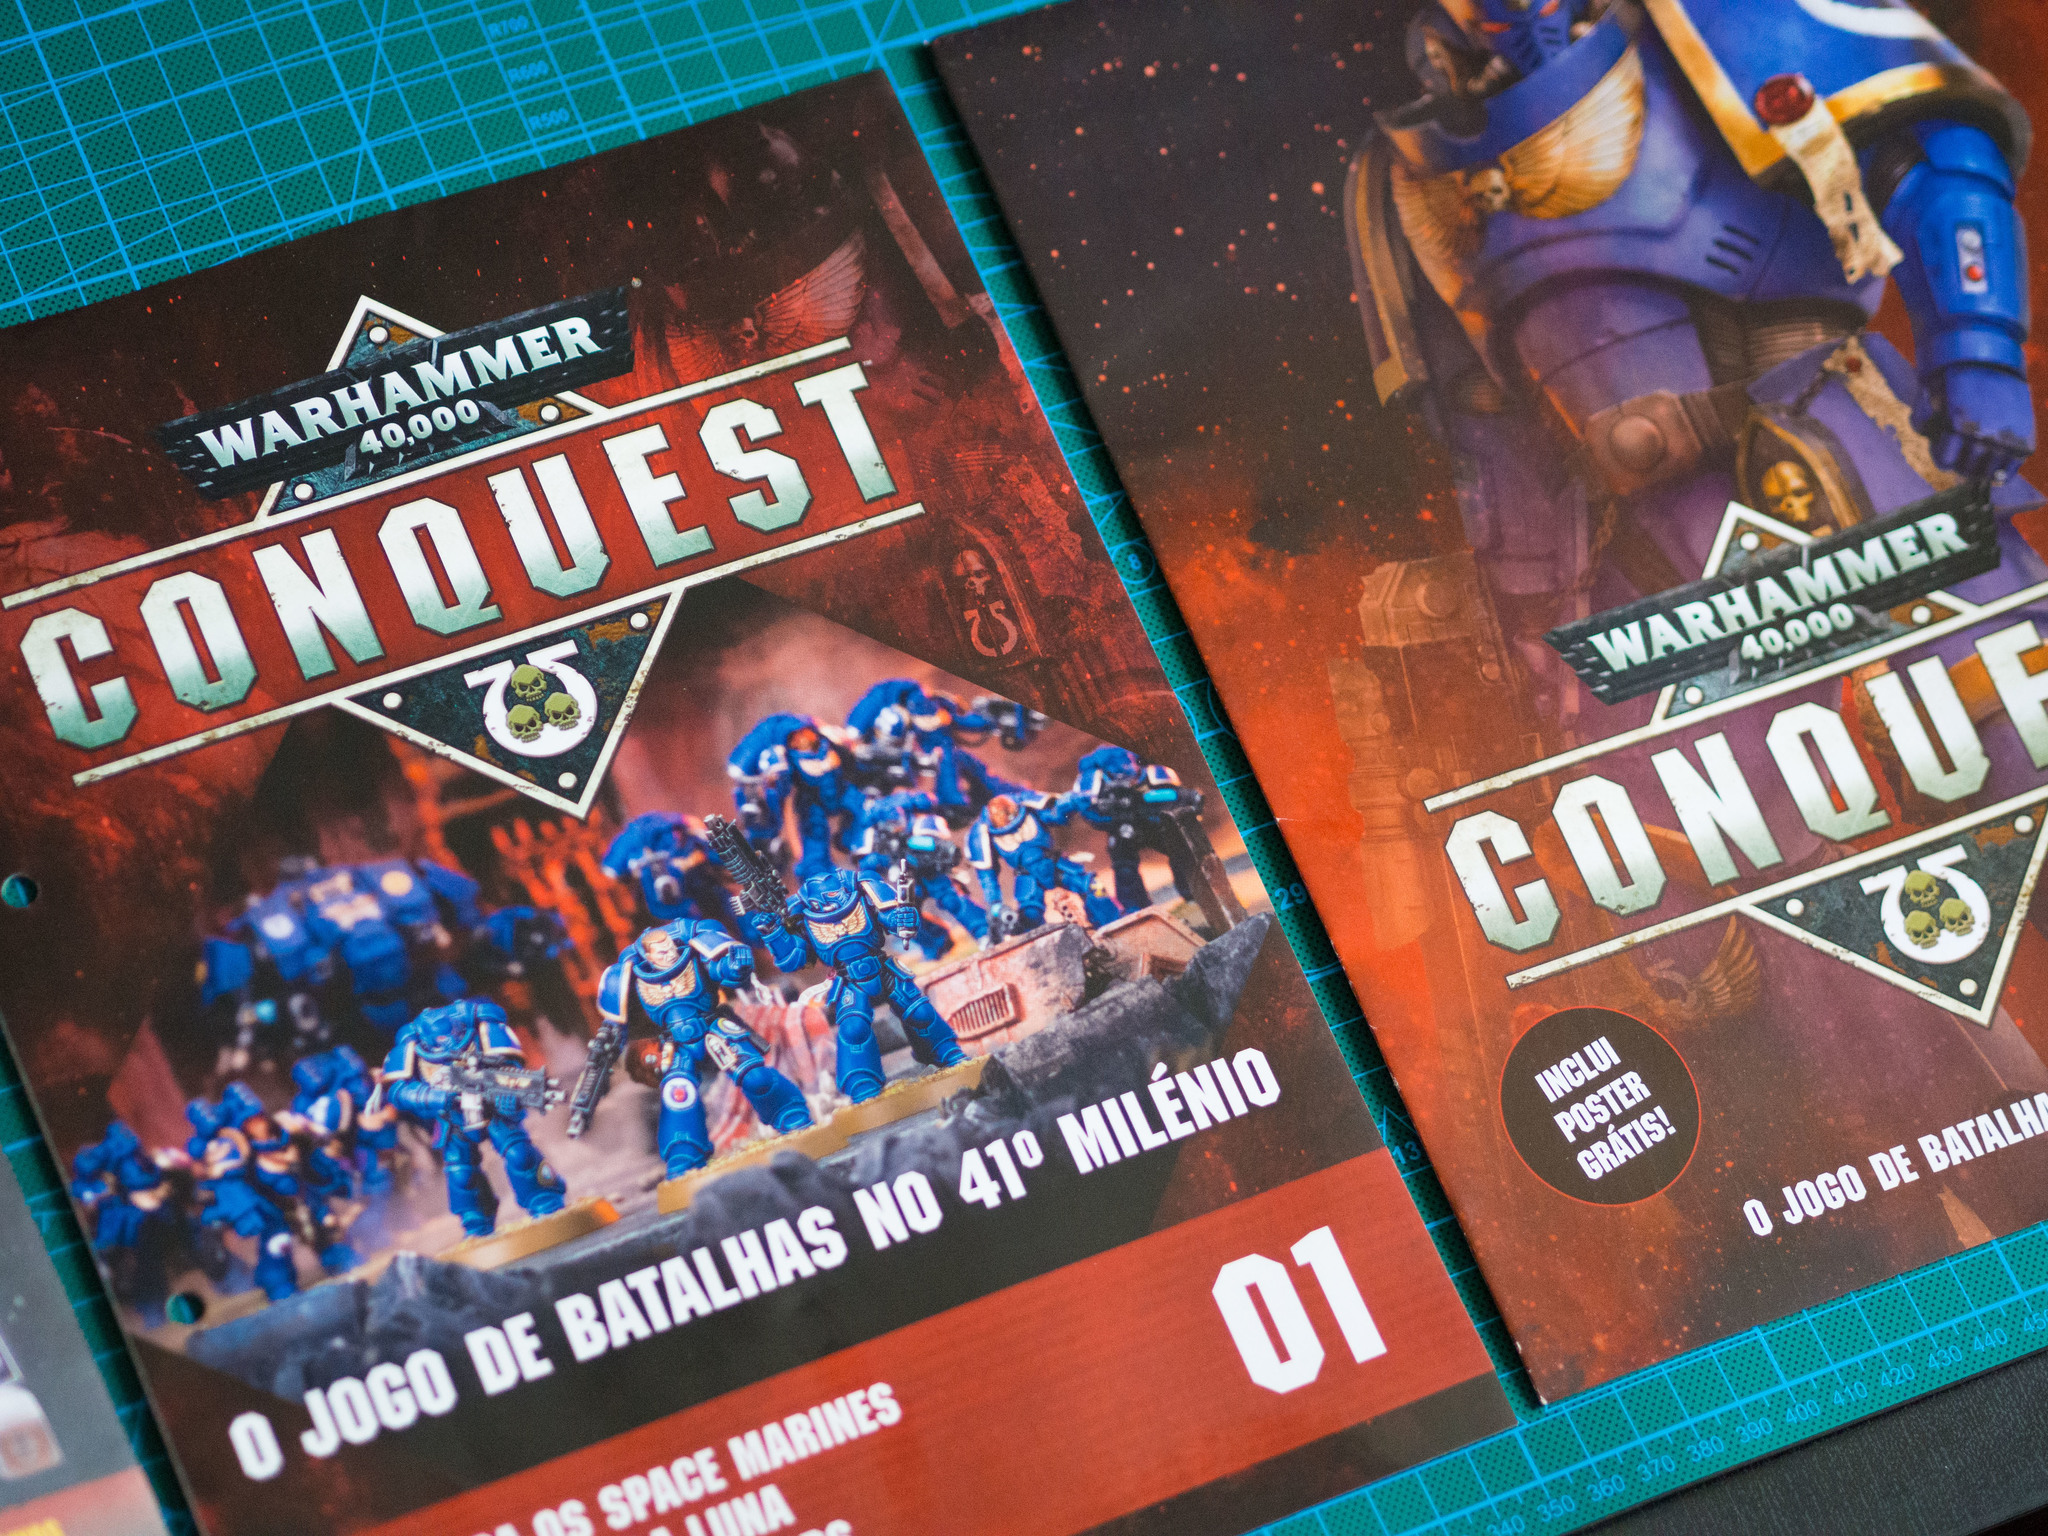 Party work according to Waha. First release of Warhammer 40,000: Conquest - My, Warhammer 40k, Collecting, Collection, Chaos space marines, Partywork, Longpost